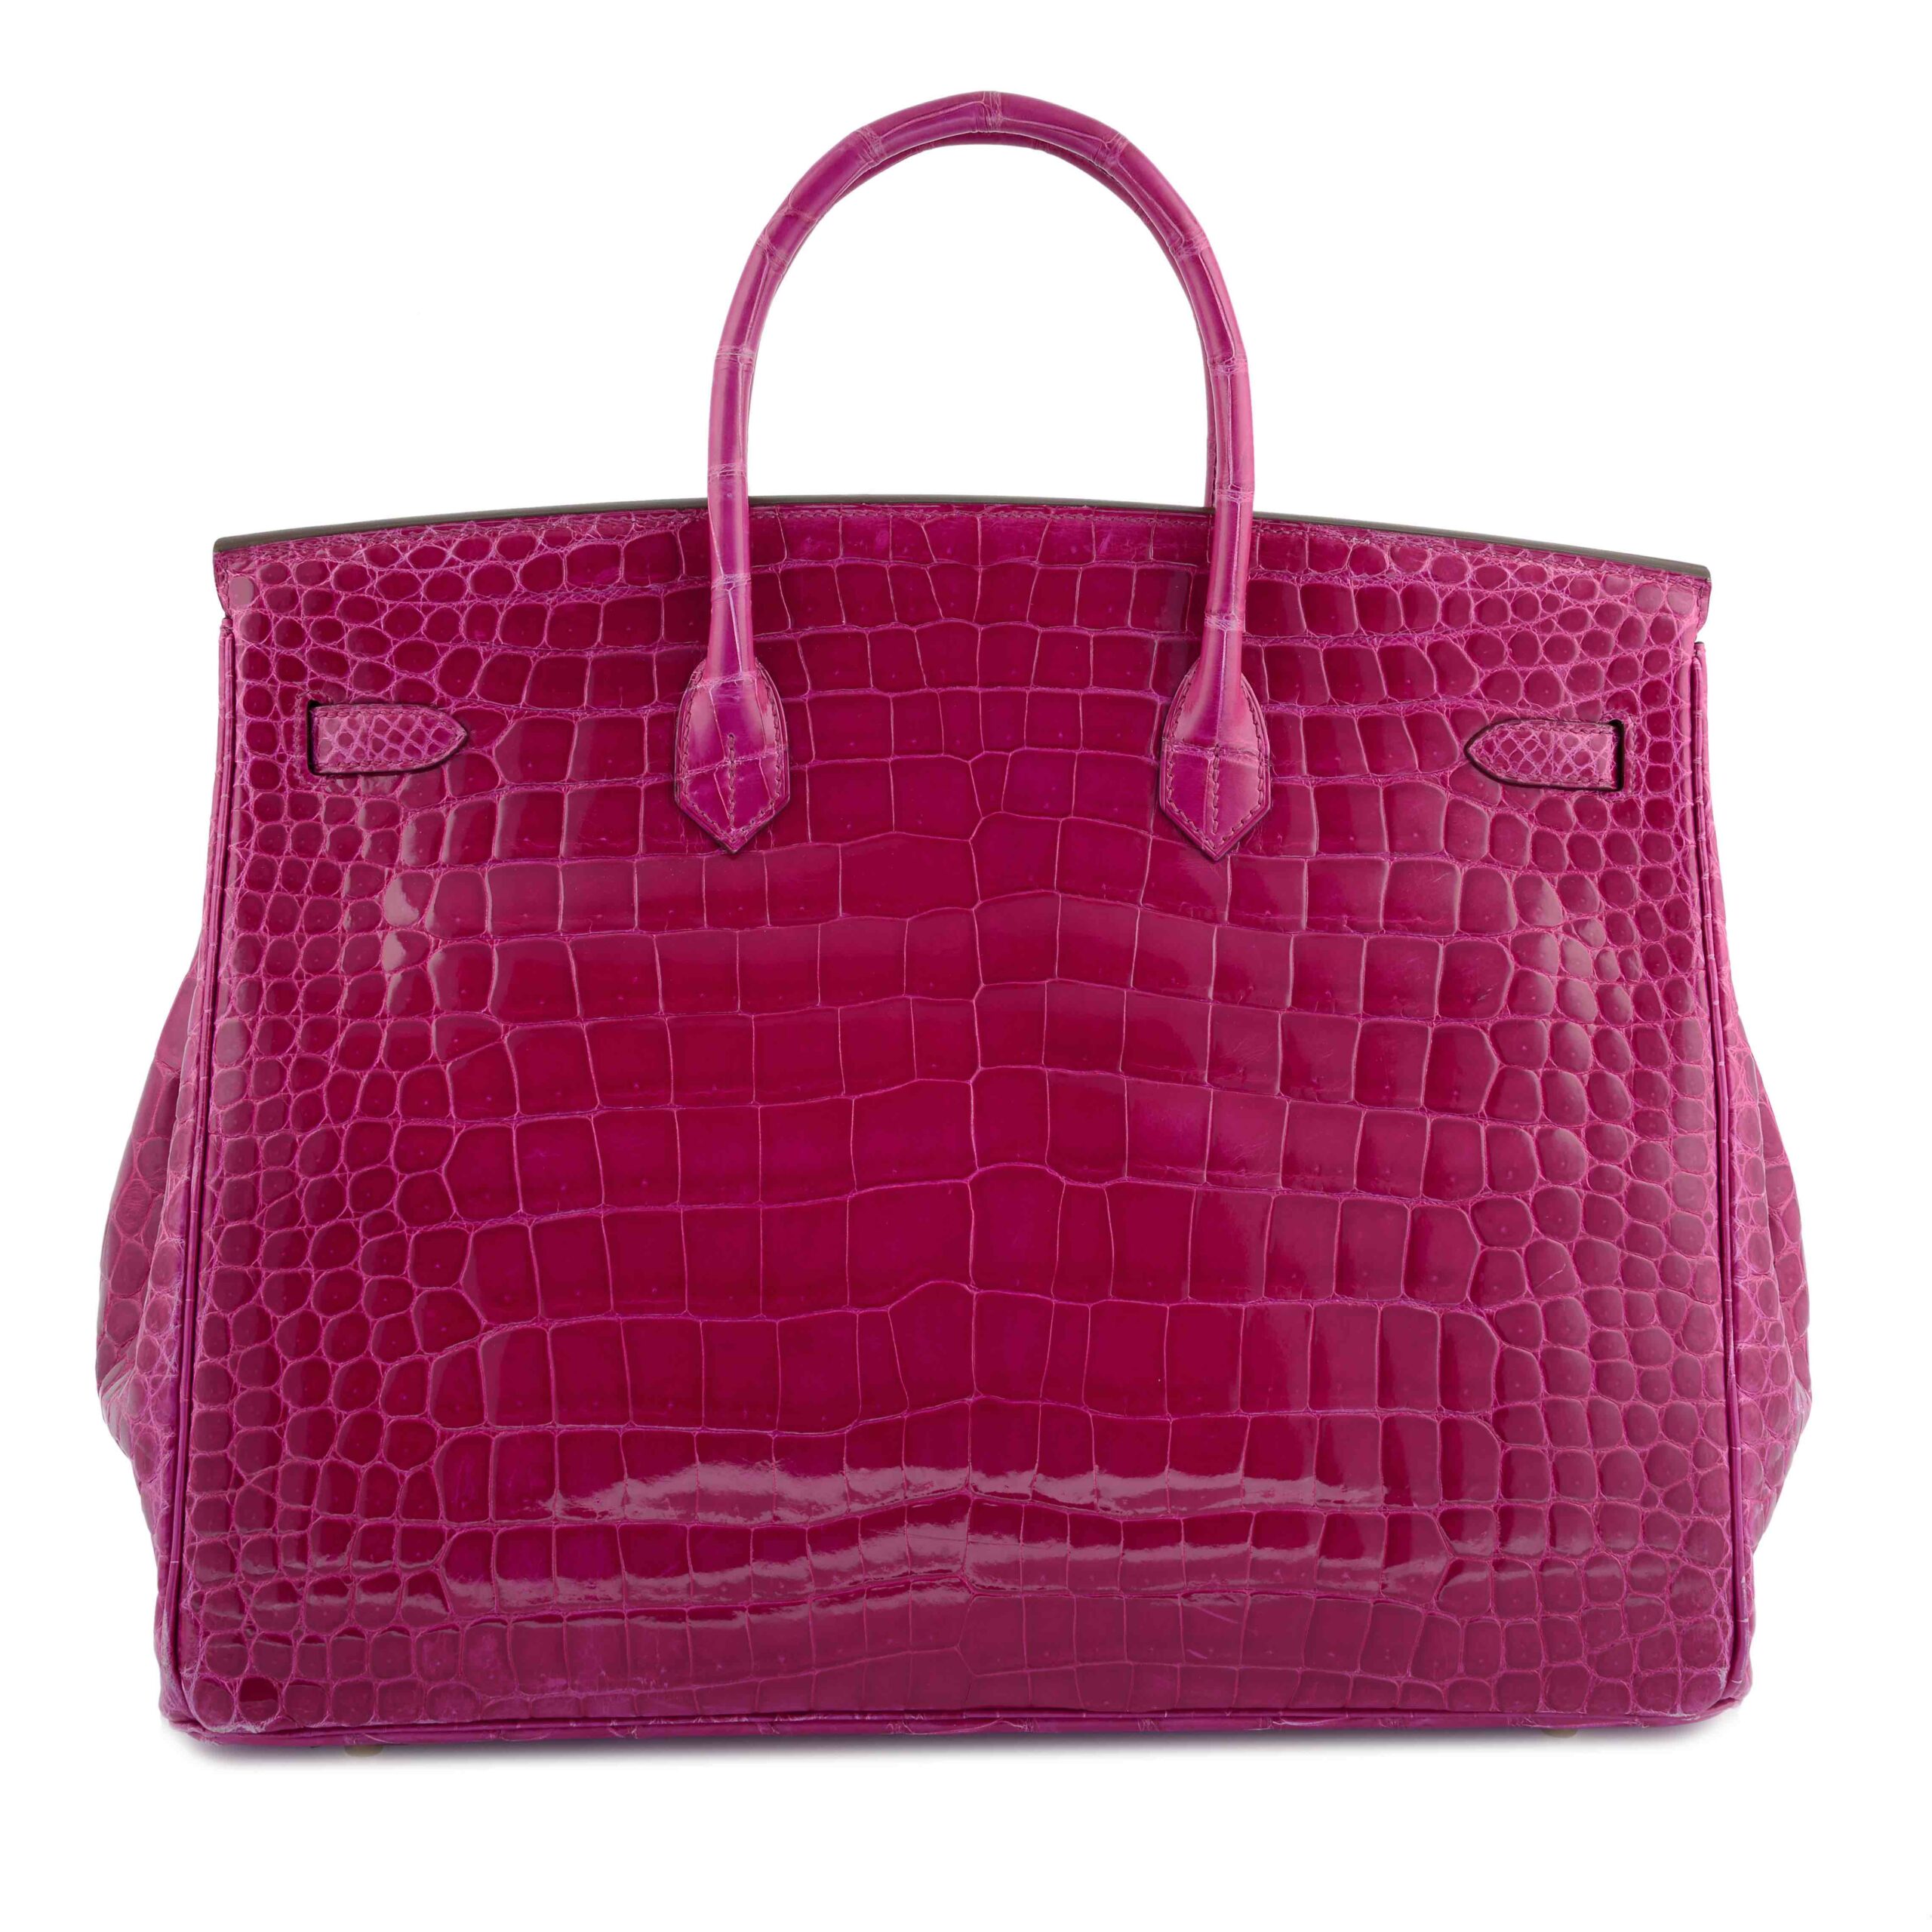 Hermés Birkin bag sells for over £160,000 in London auction